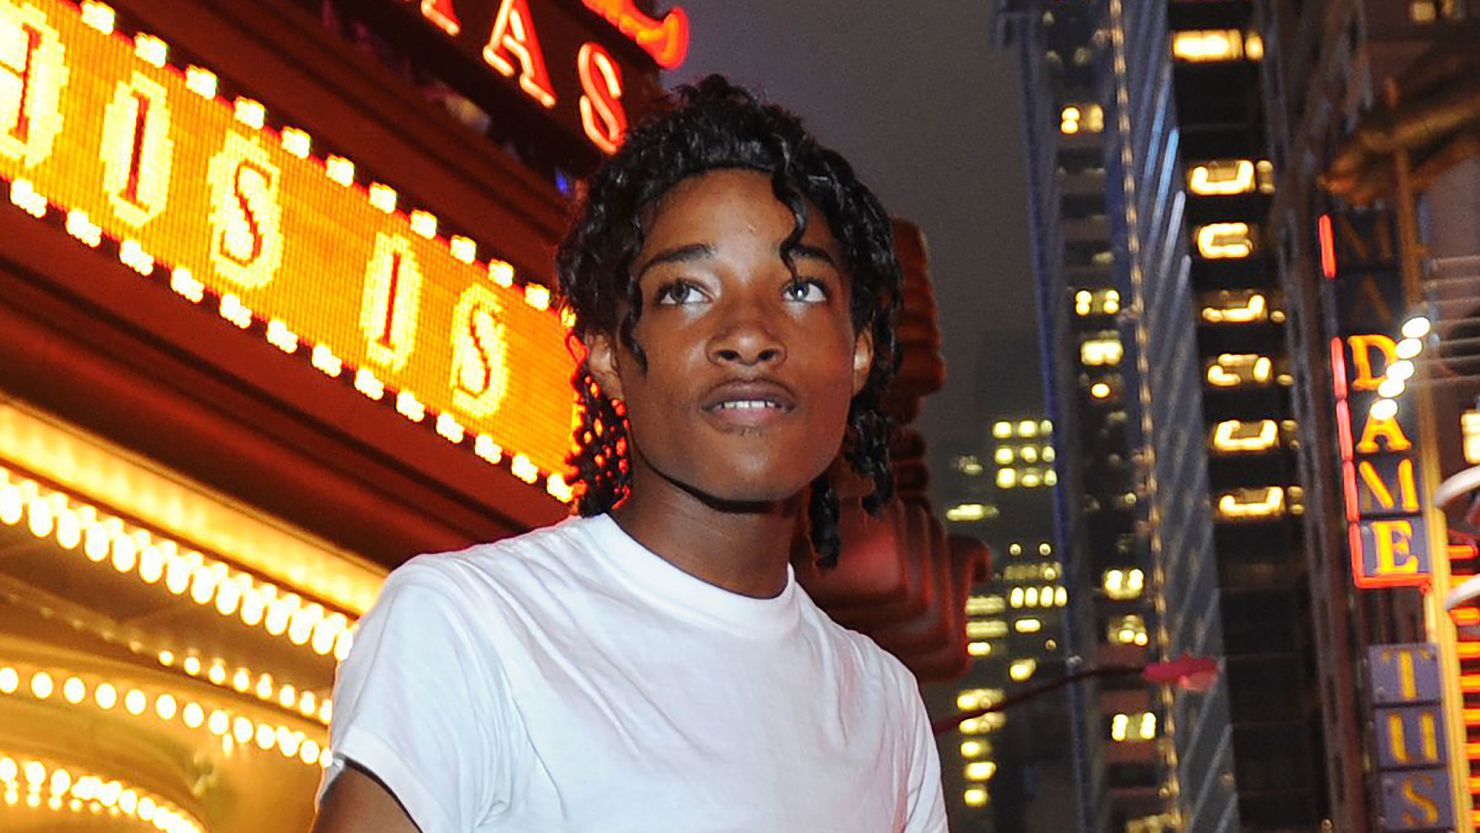 Jordan Neely was a New York street artist known for his Michael Jackson impersonations.